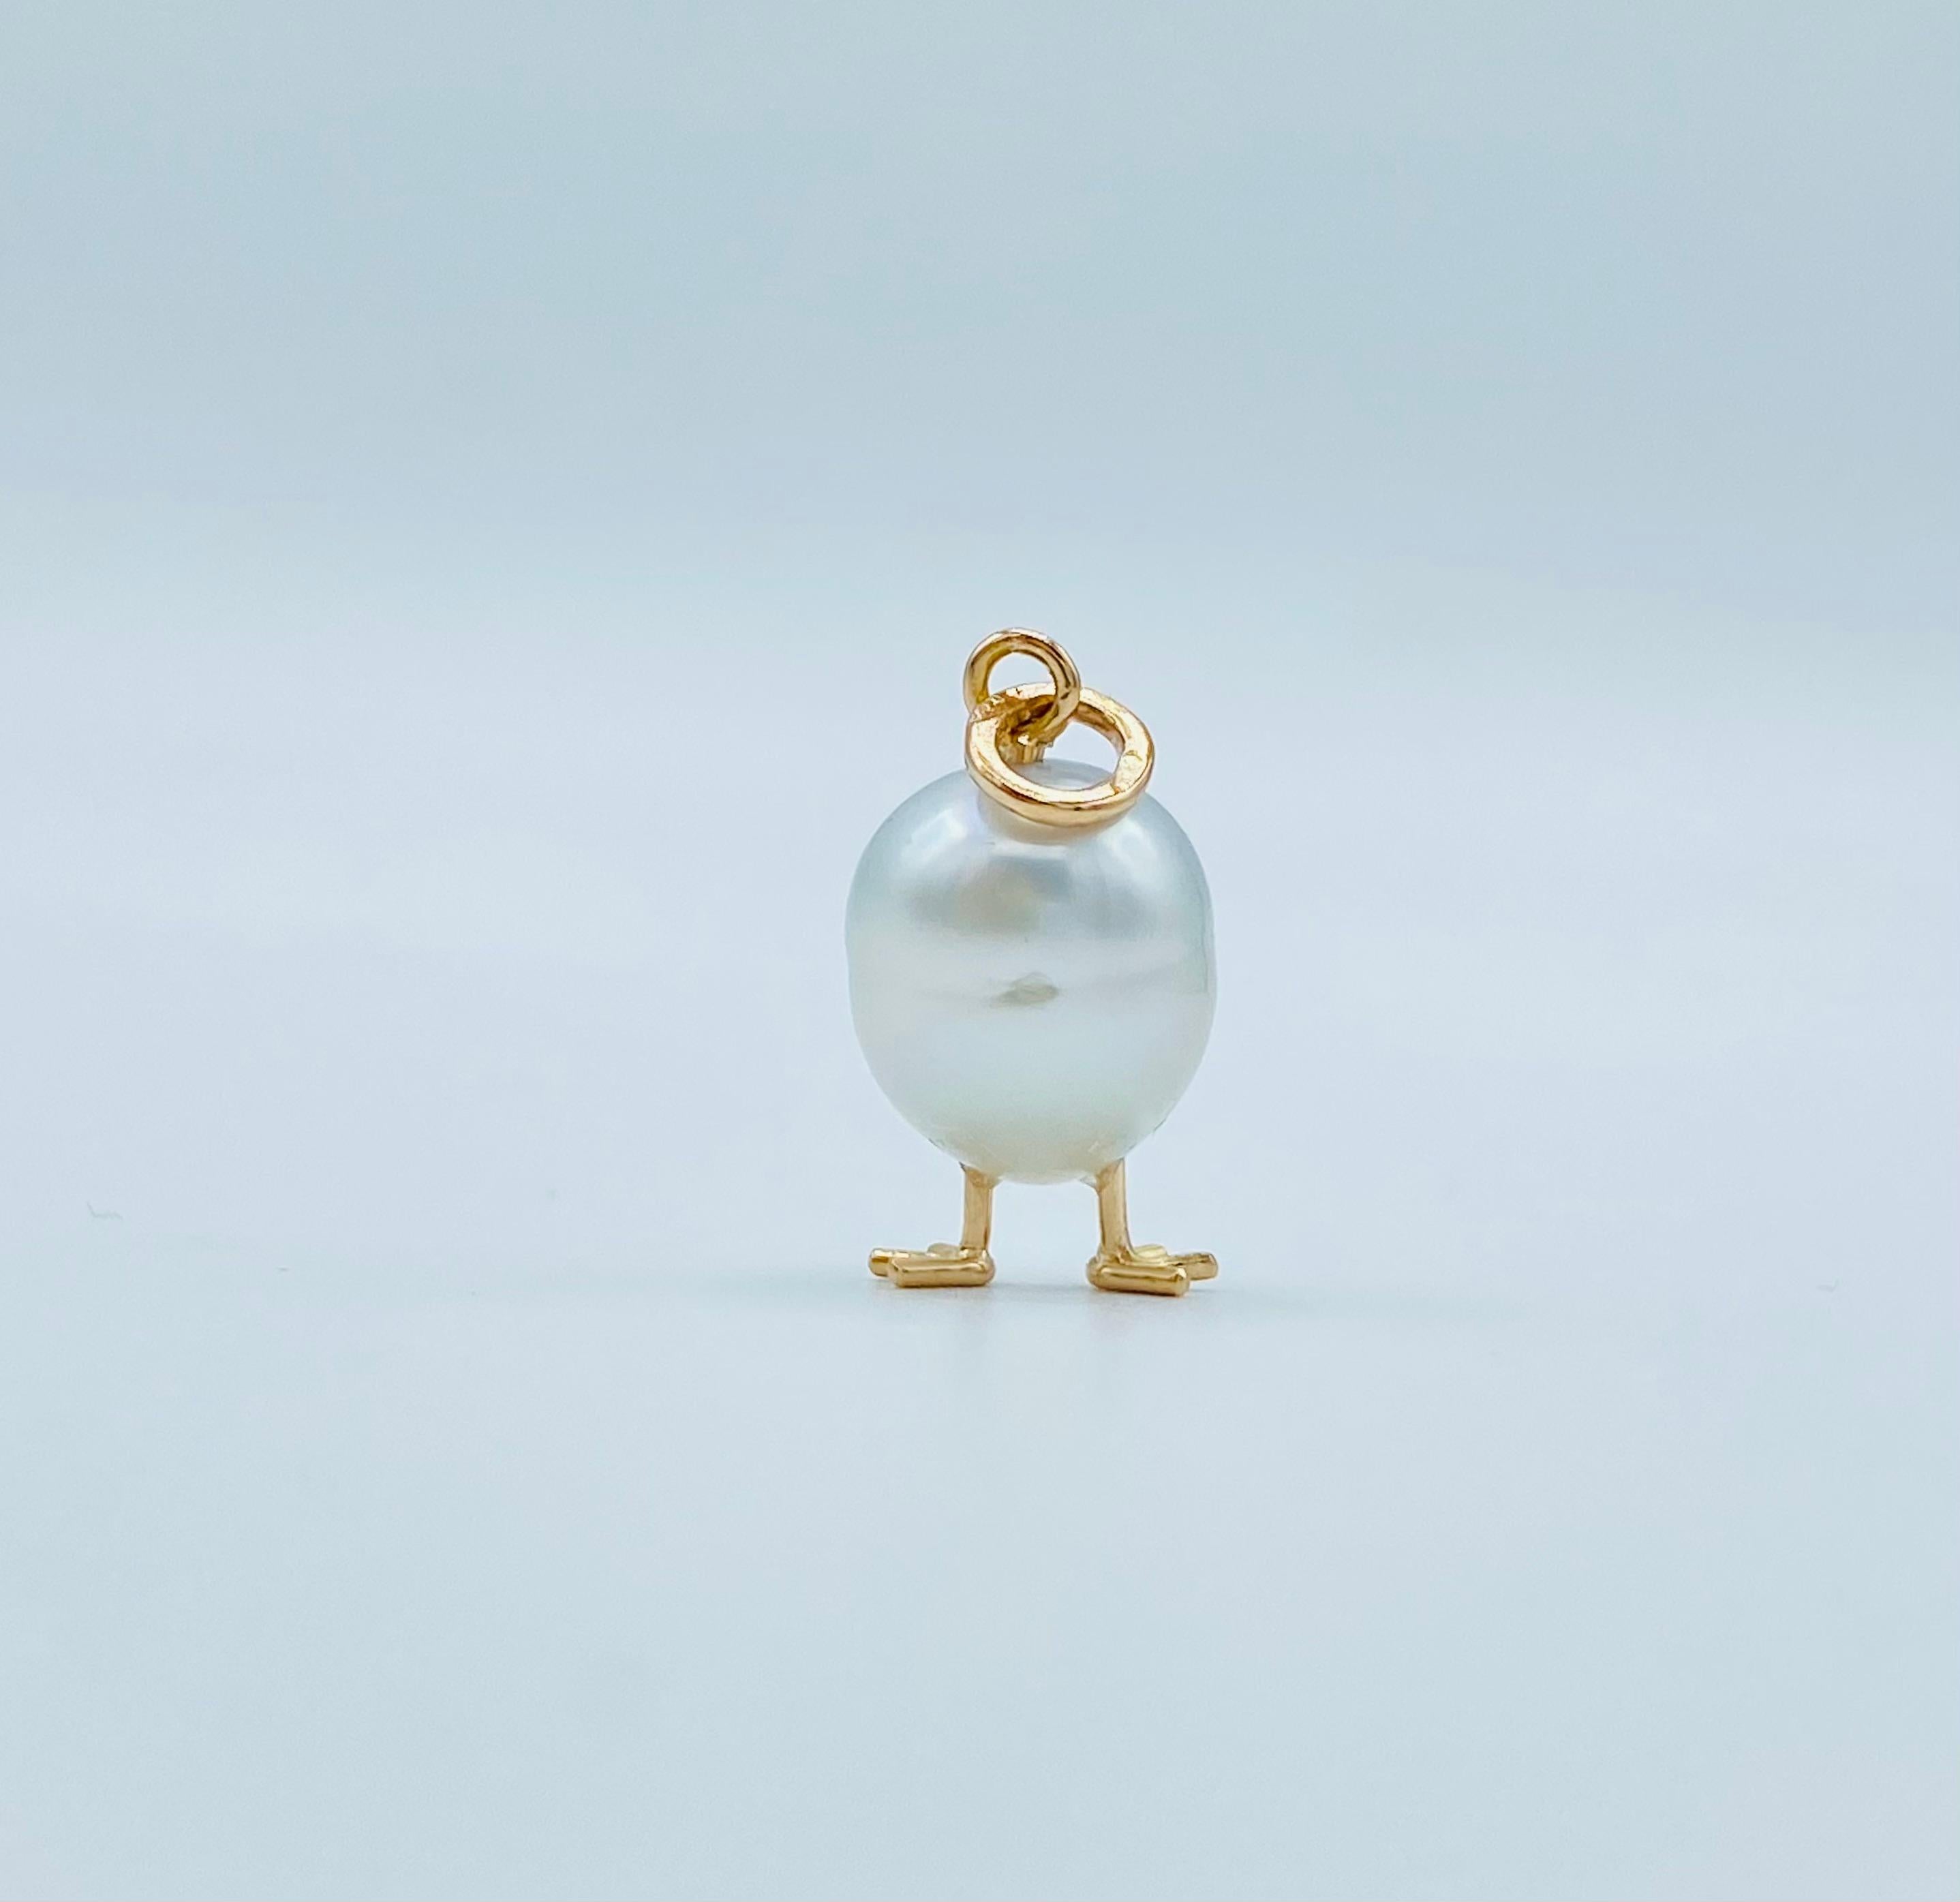 I made this chick pendant with a very nice Australian pearl measuring 10.5x12.5 mm.
The eyes are two black diamonds totaling 0.07 ct. The various elements are made of rose gold while the black eye bezels  are made of white gold.

Despite the fact